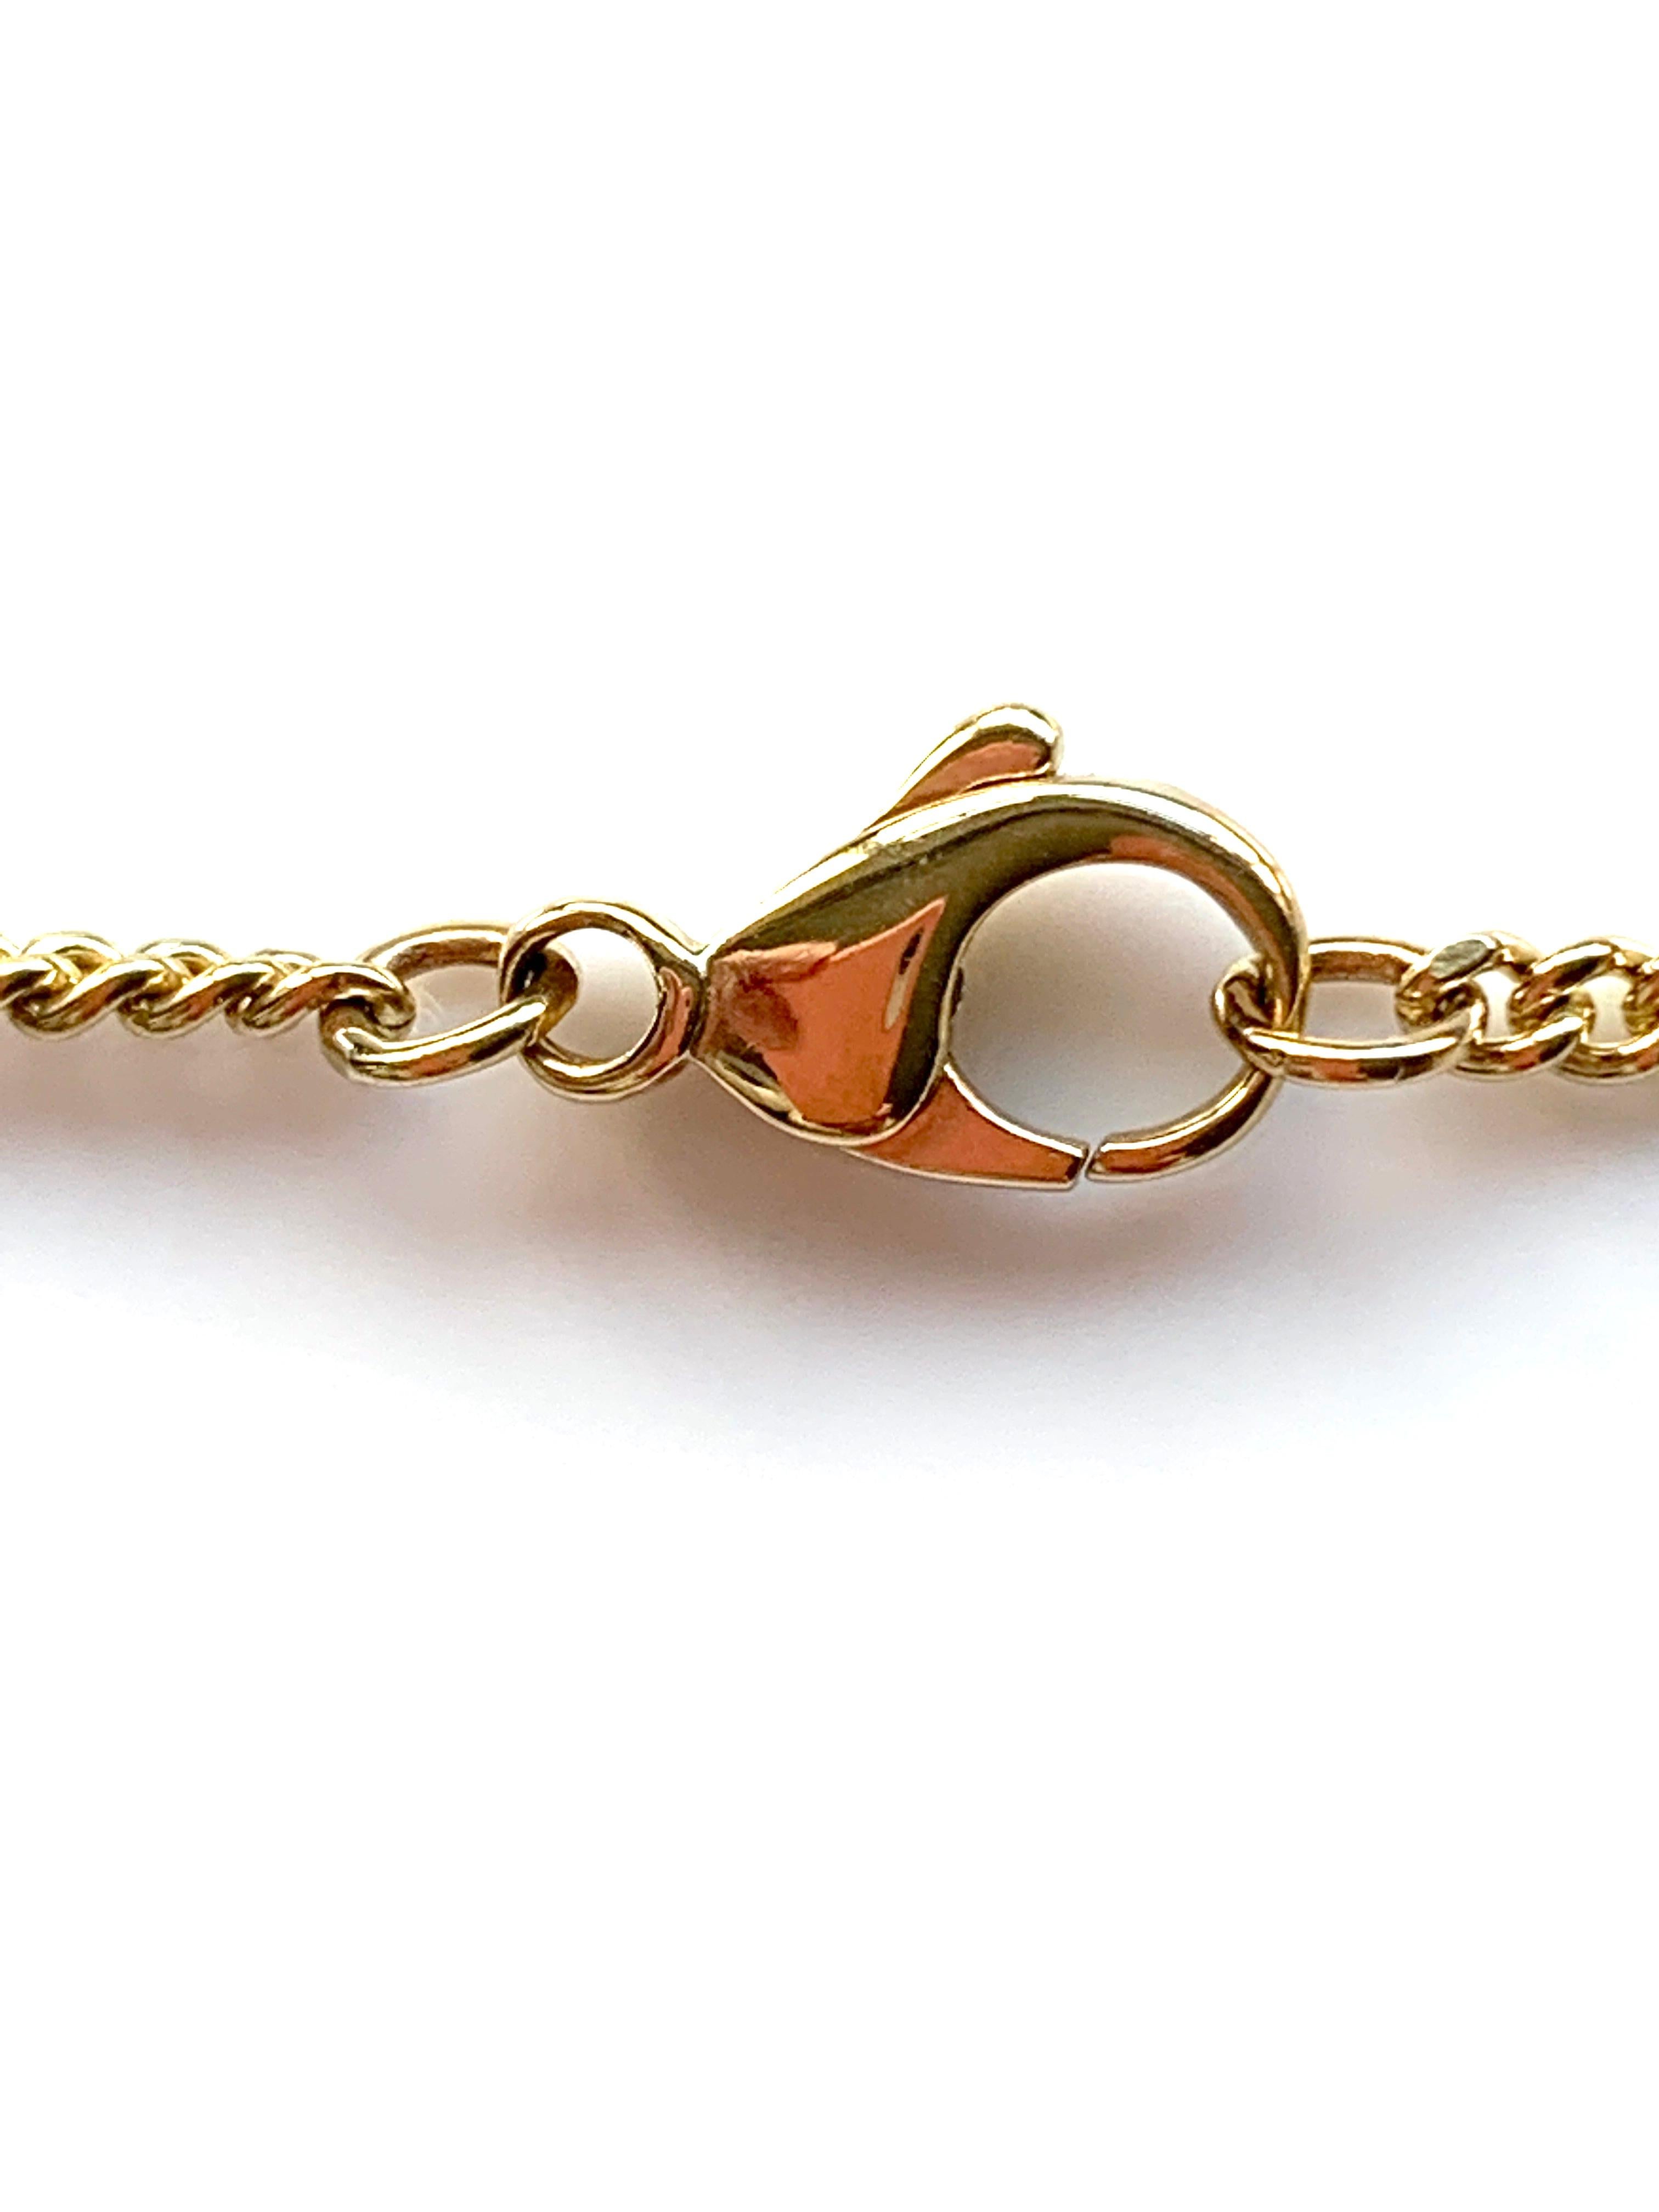 Women's 9ct Gold Curb Chain For Sale